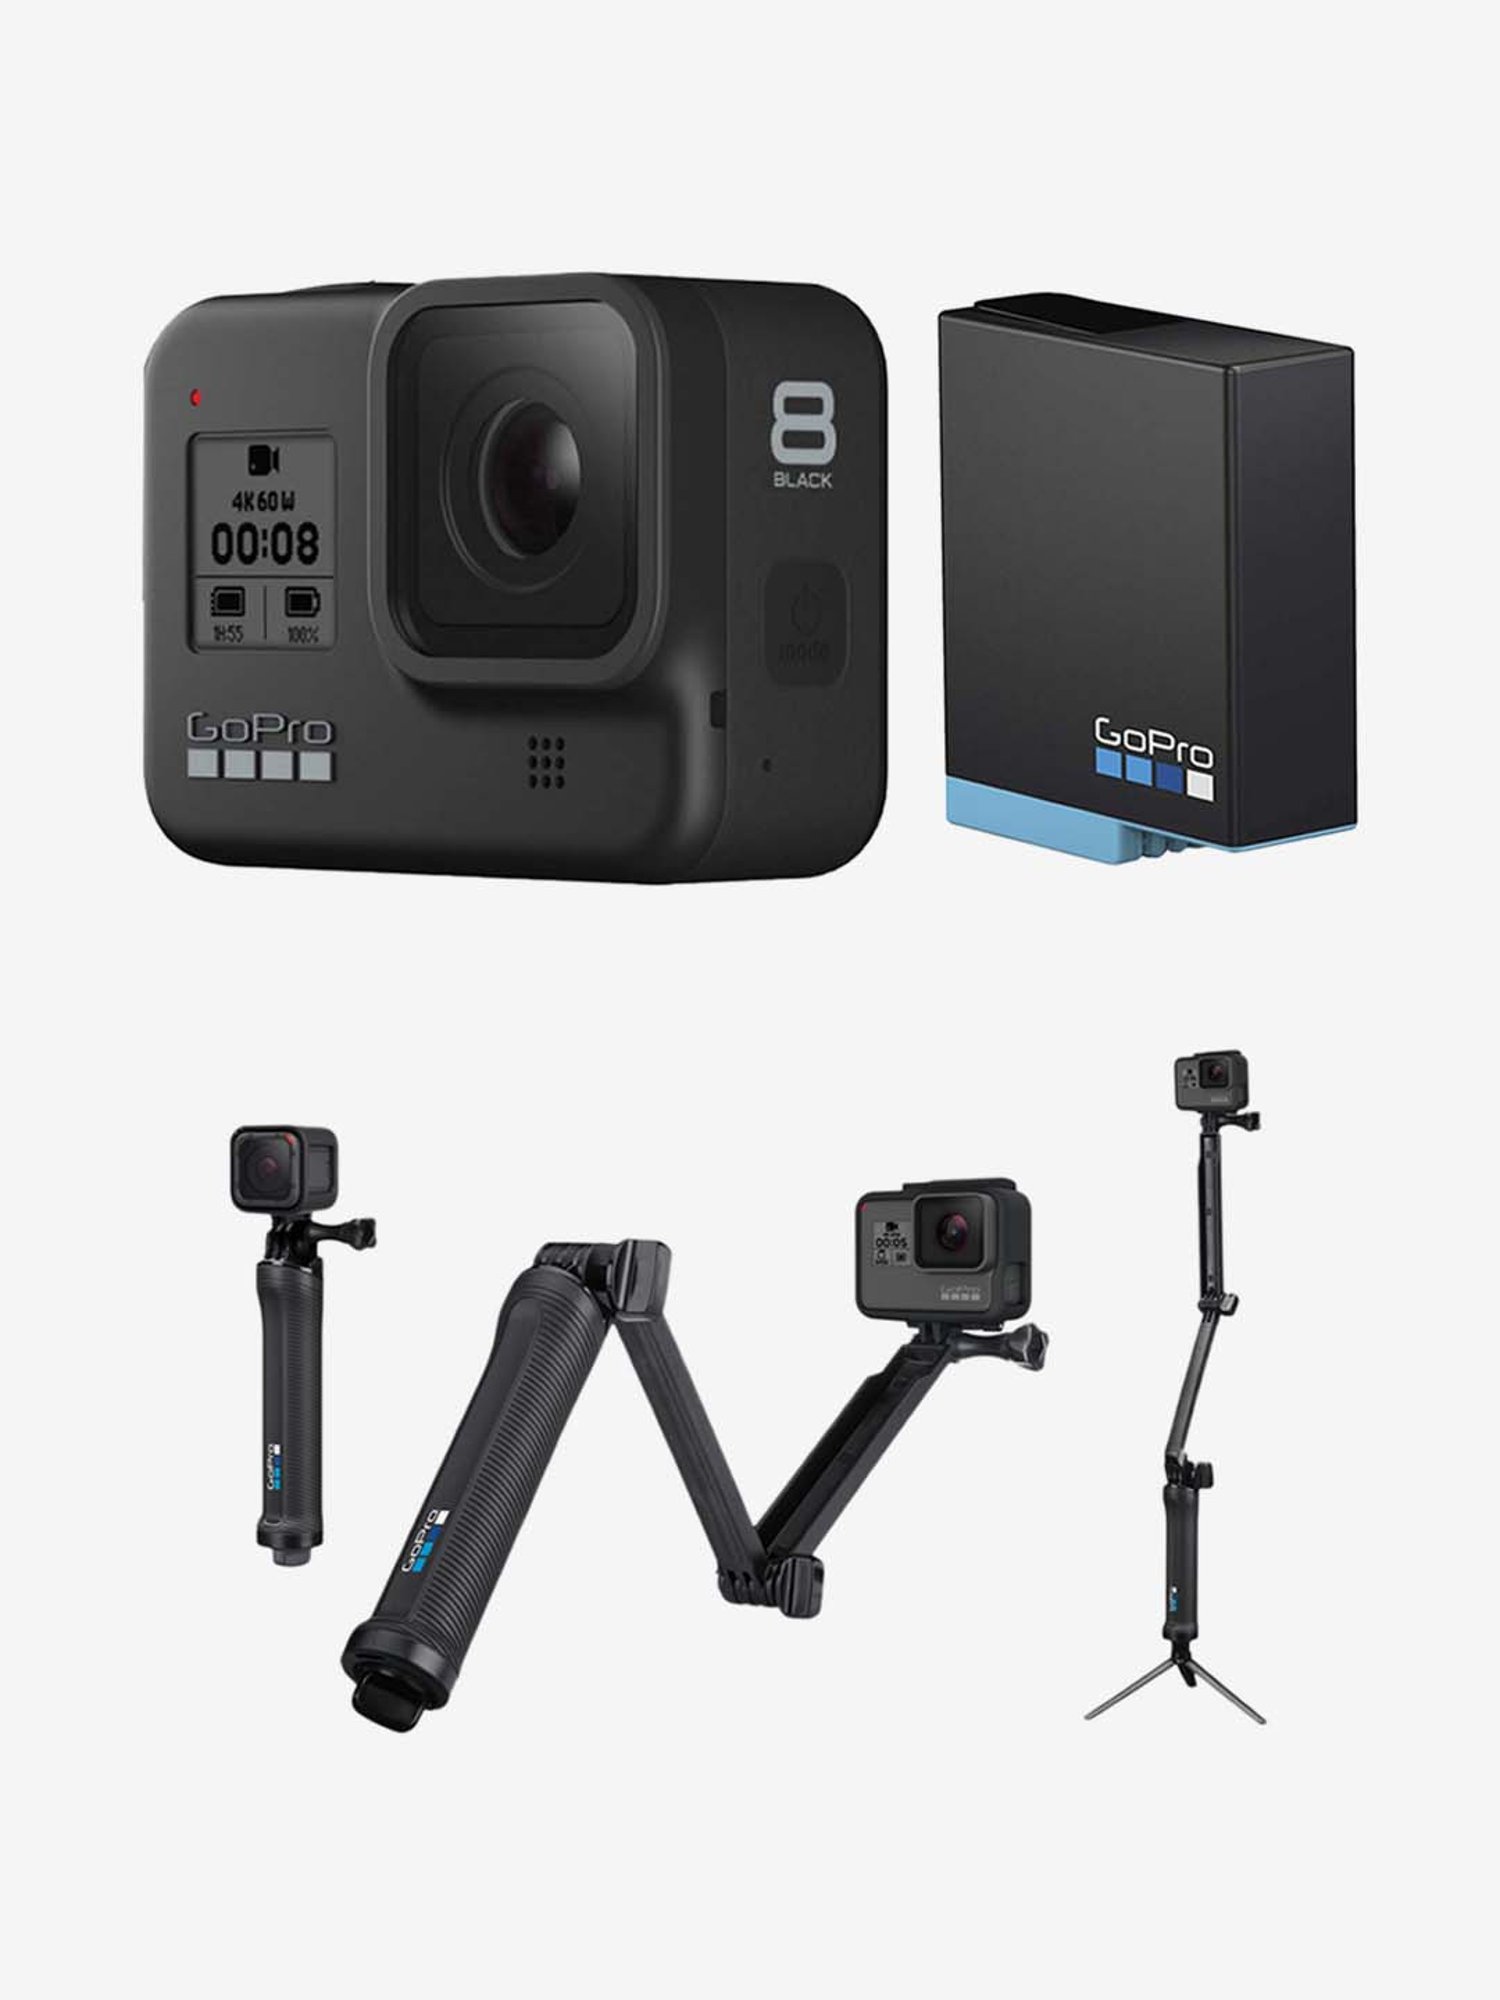 Gopro Hero 8 Chdhx 801 12 Mp Sports And Action Camera With 3 Way Grip Rechargeable Battery Black From Gopro At Best Prices On Tata Cliq